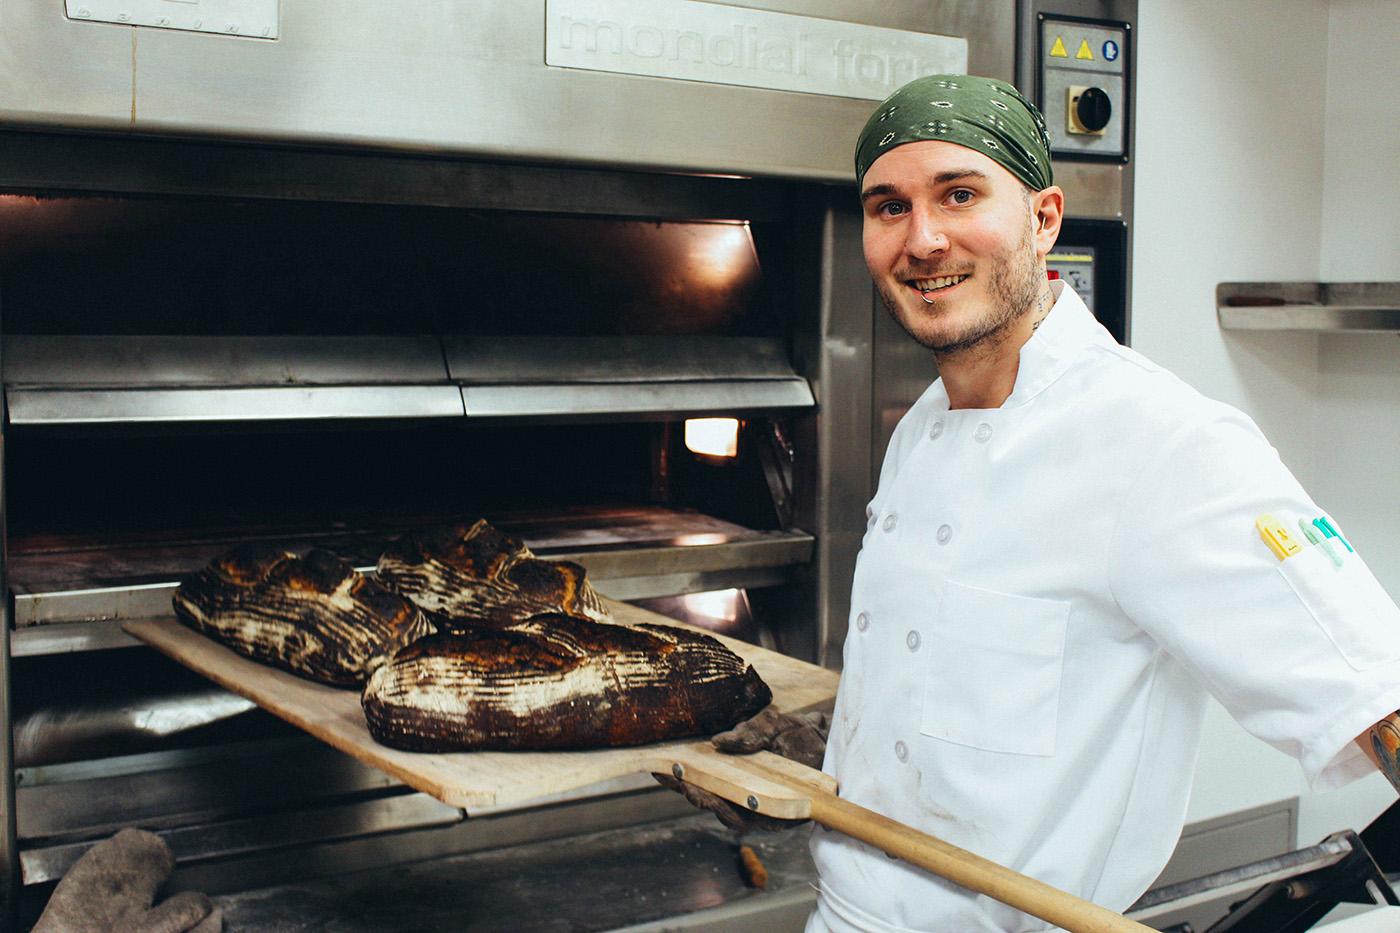 Greg Wade of Publican Quality Breads, up for Outstanding Baker at the James Beard Awards for the second year in a row.